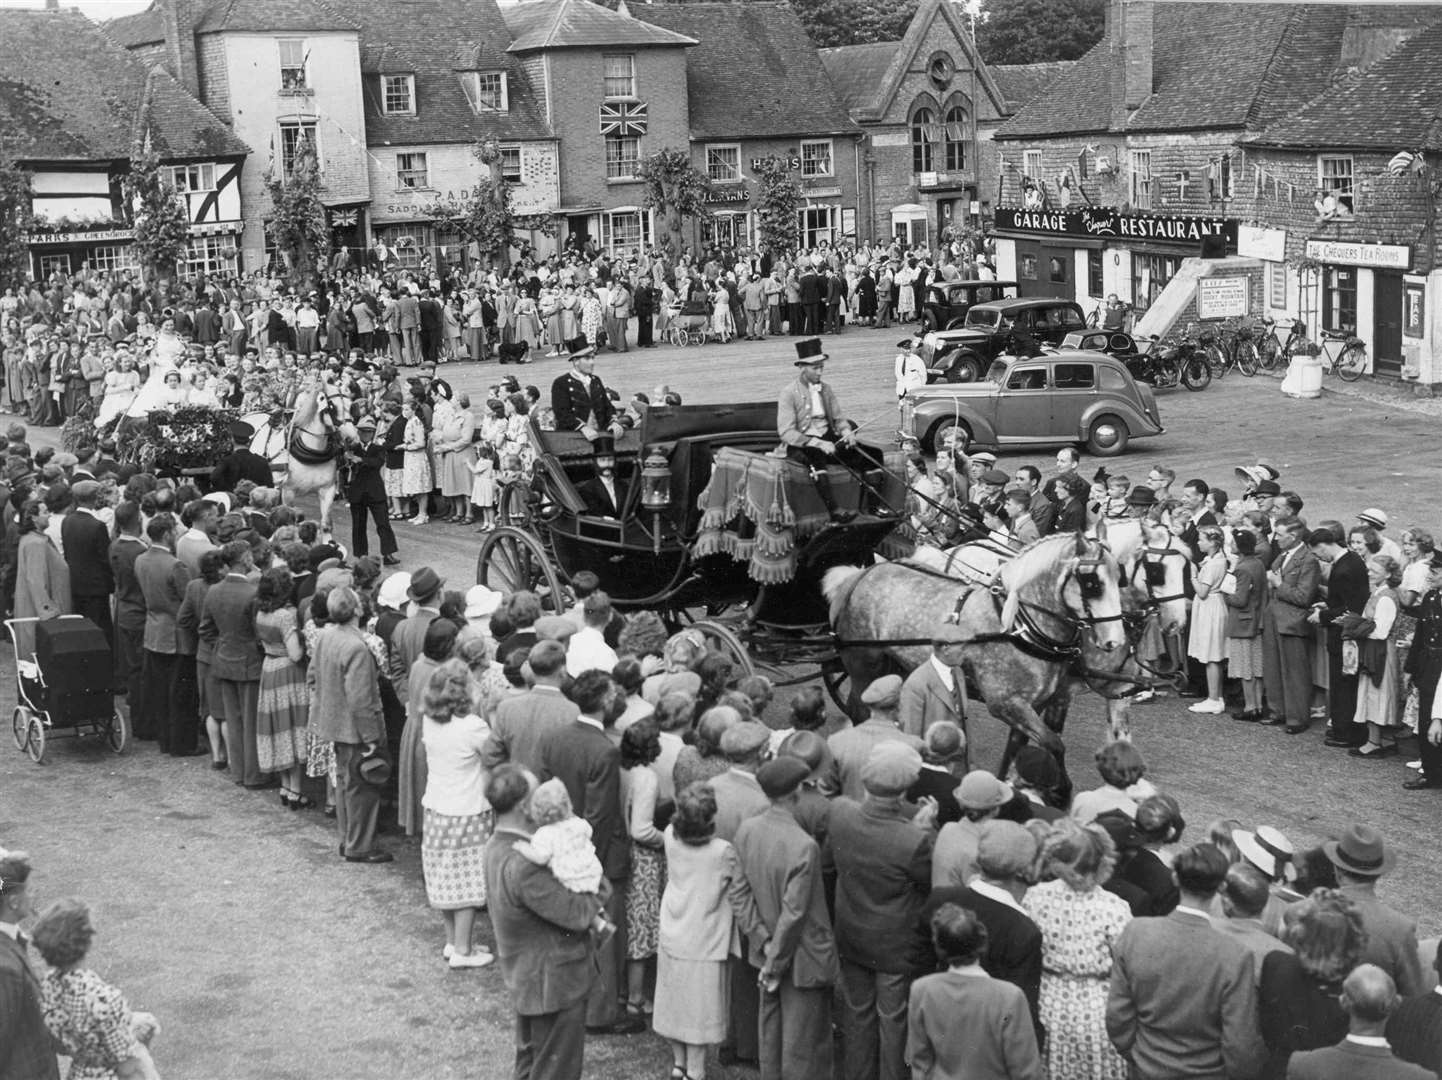 A 1950s picture of one of the pageants which were a feature of the life in Lenham